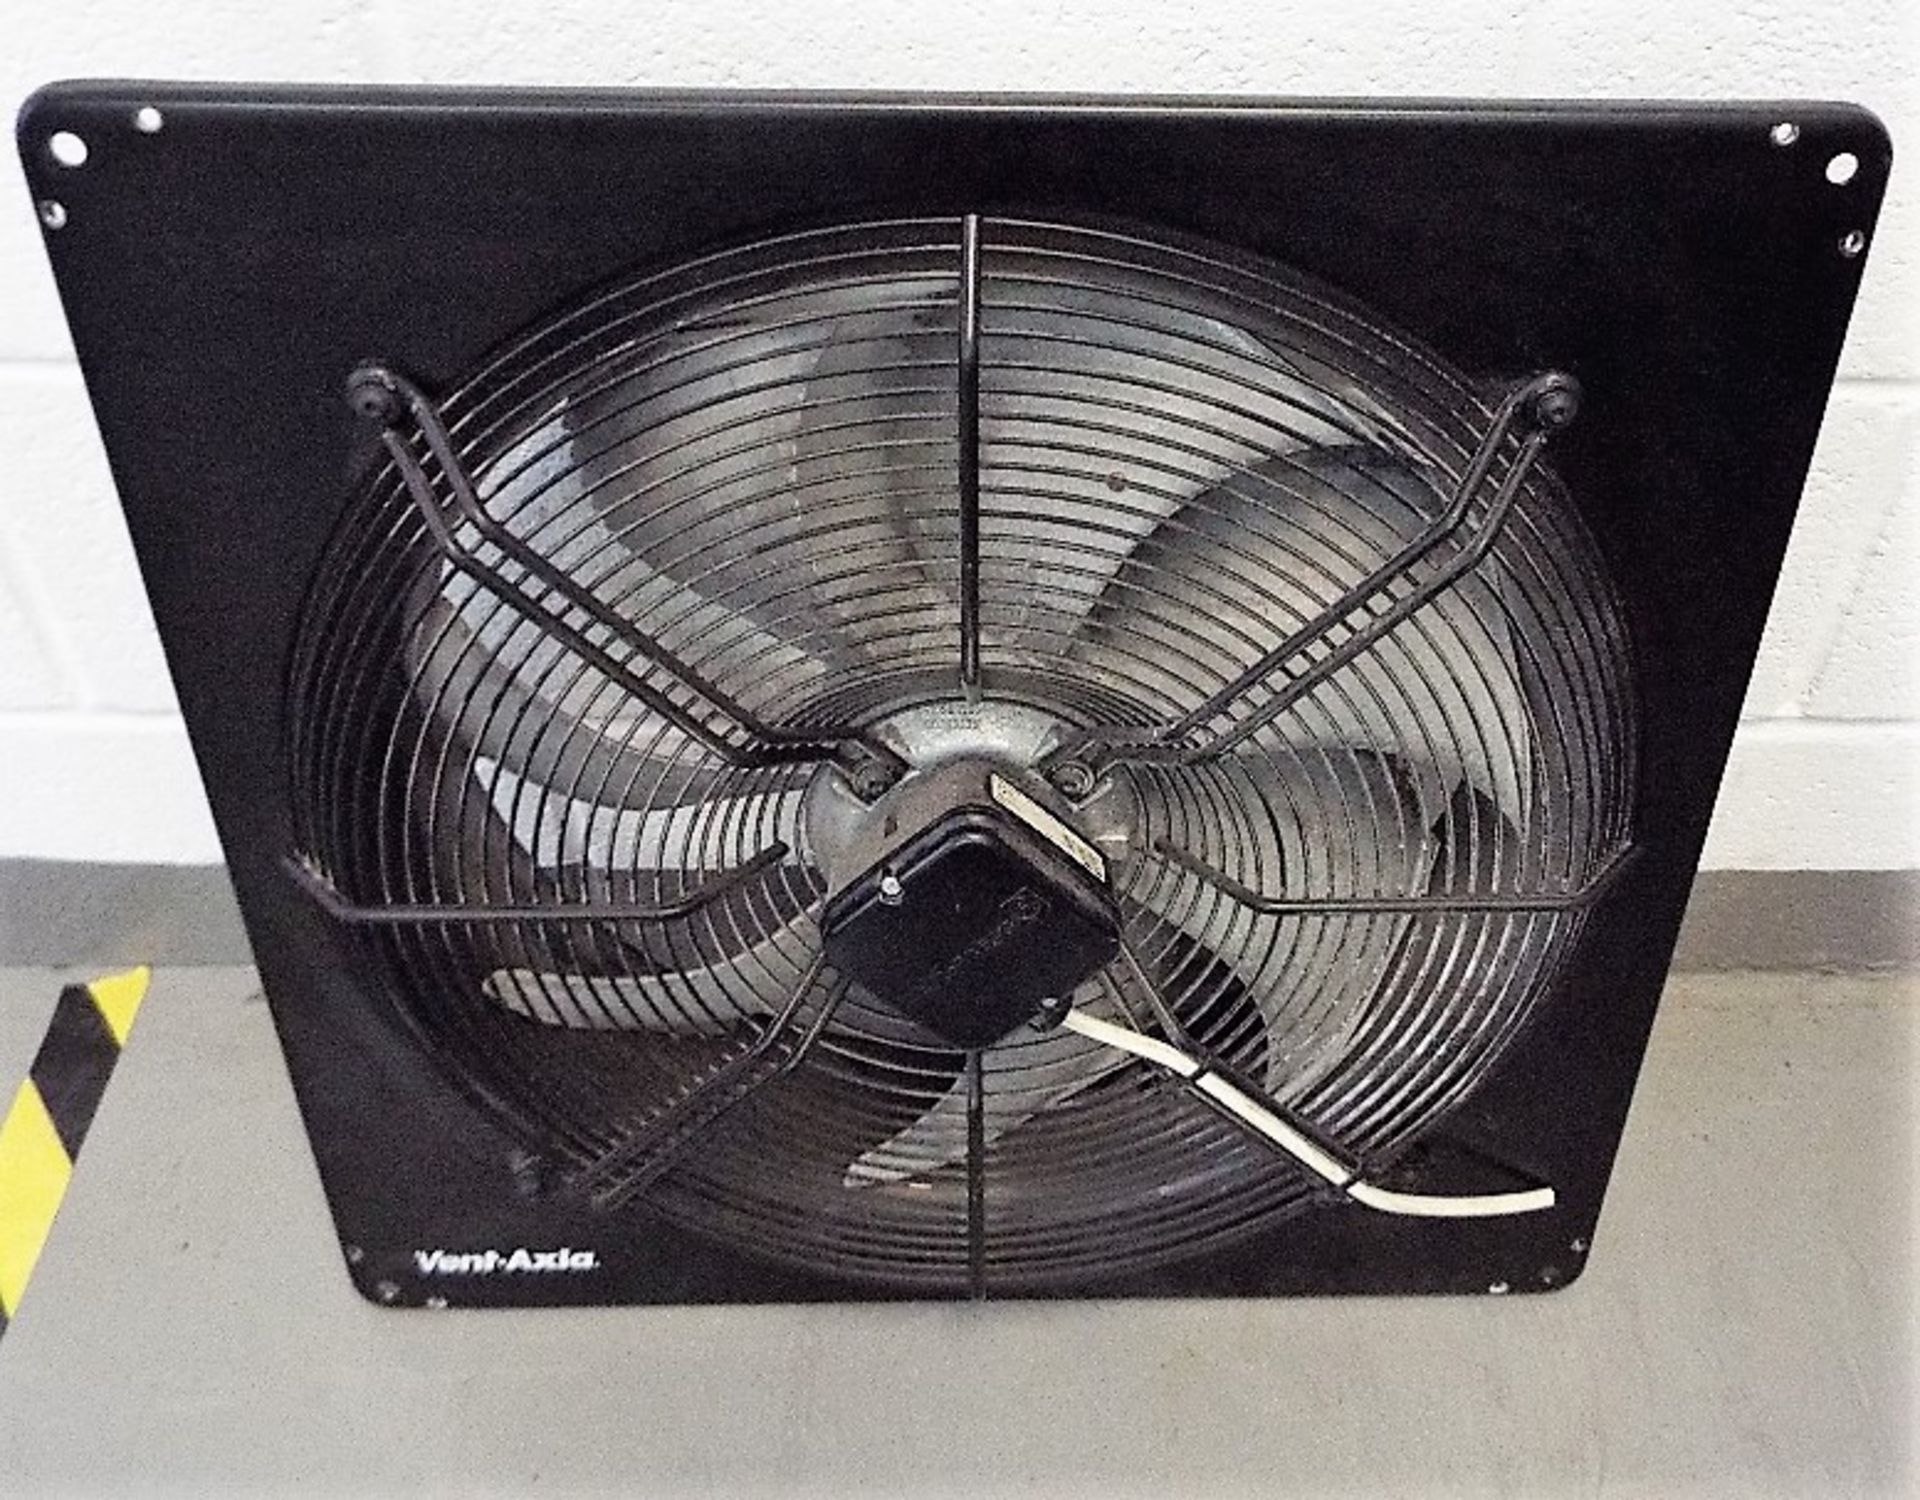 VENT AXIA CEILING MOUNTED EXTRACTION FAN